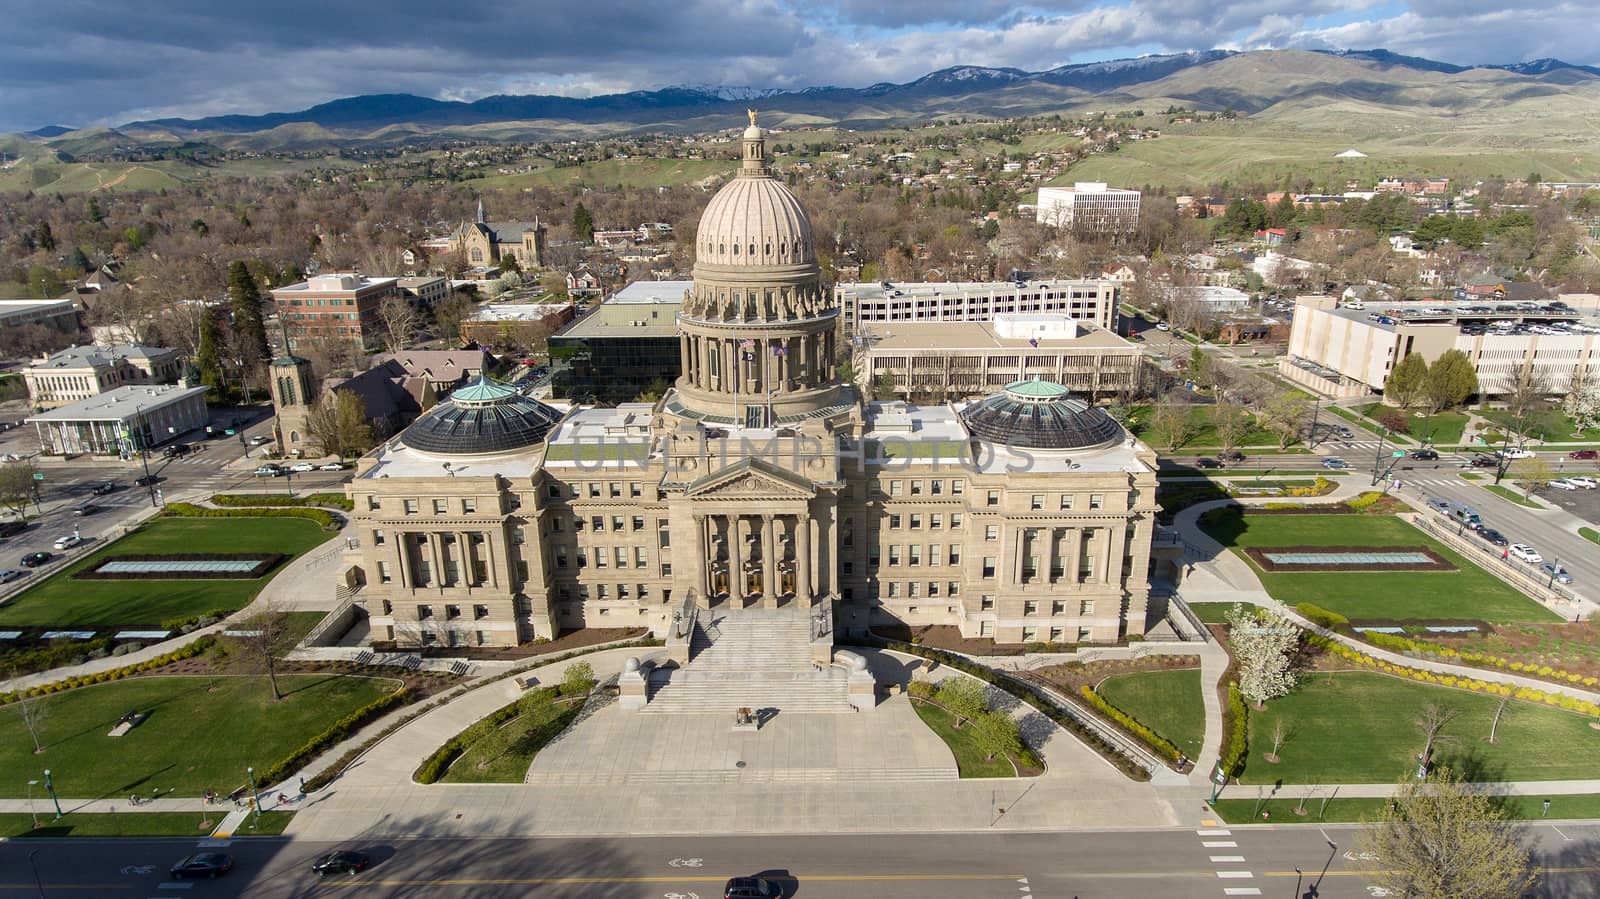 High up view of the boise capital building